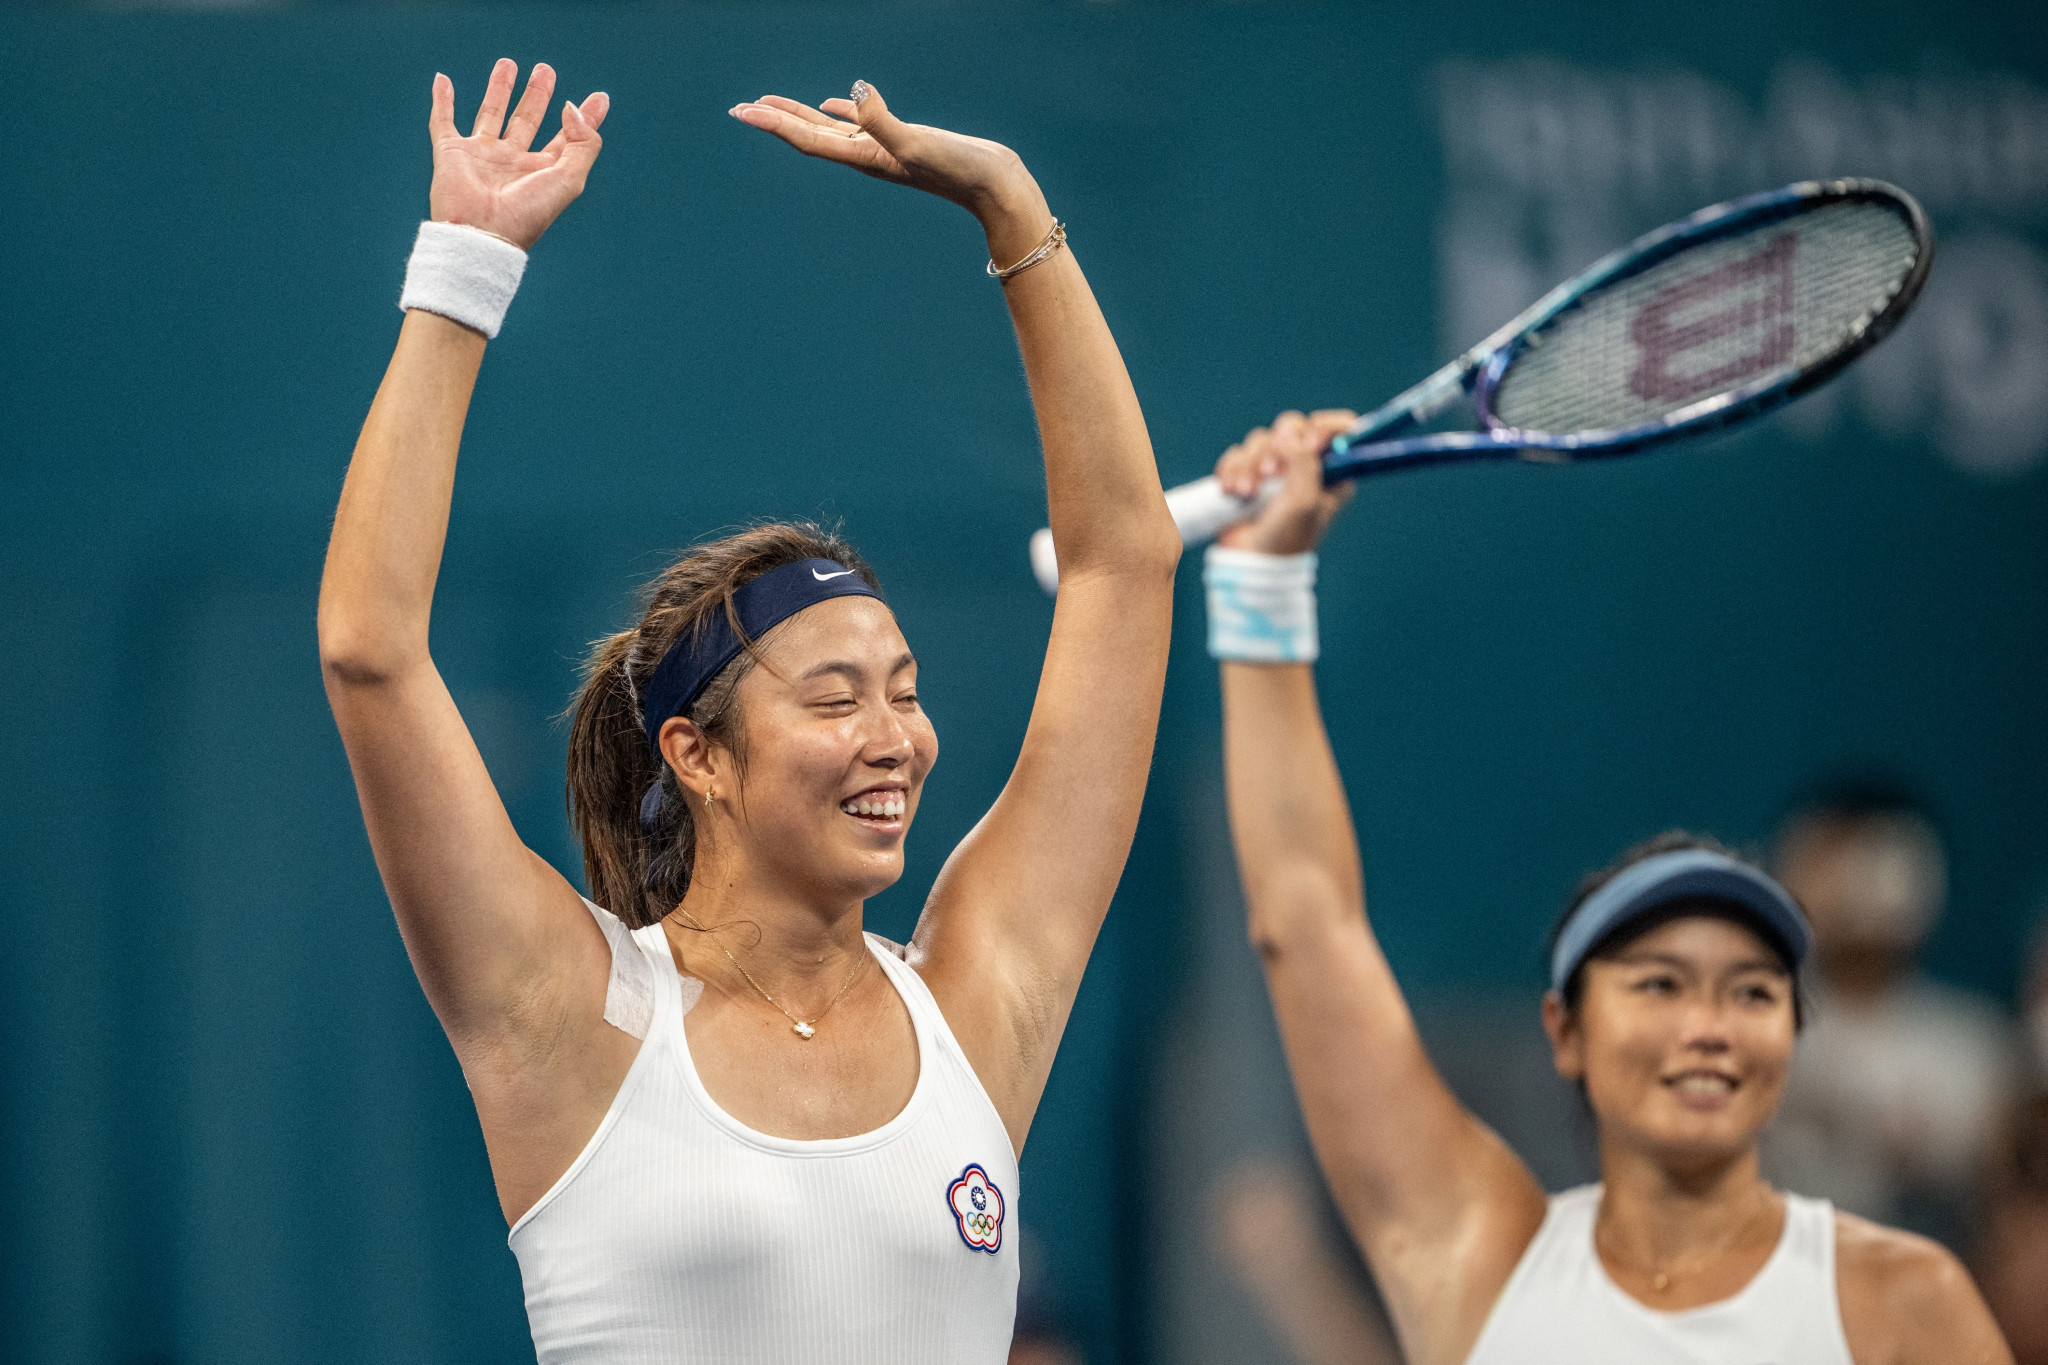 The Chan sisters Hao-ching, left, and Yung-jan captured the women's doubles crown with a 6-4, 6-3 victory over Lee Ya-hsun and Liang En-shuo ©Getty Images